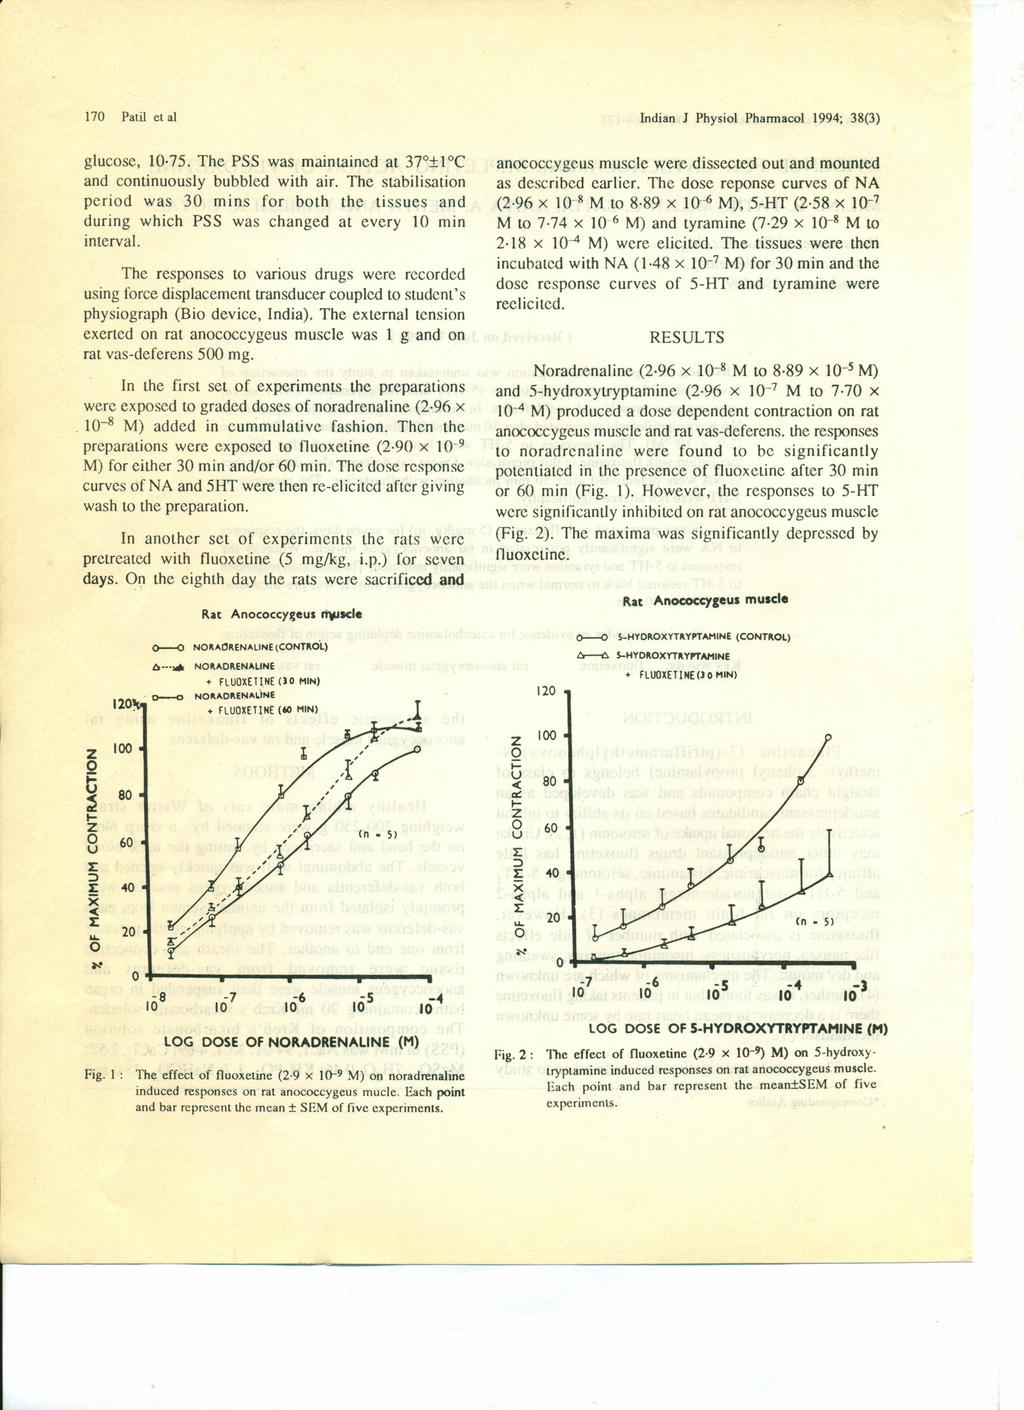 17 Patil et al Indian J Physiol Pharmacol 1994; 38(3) glucose, 1 75. The PSS was maintained at 37 ±1 C and continuously bubbled with air.